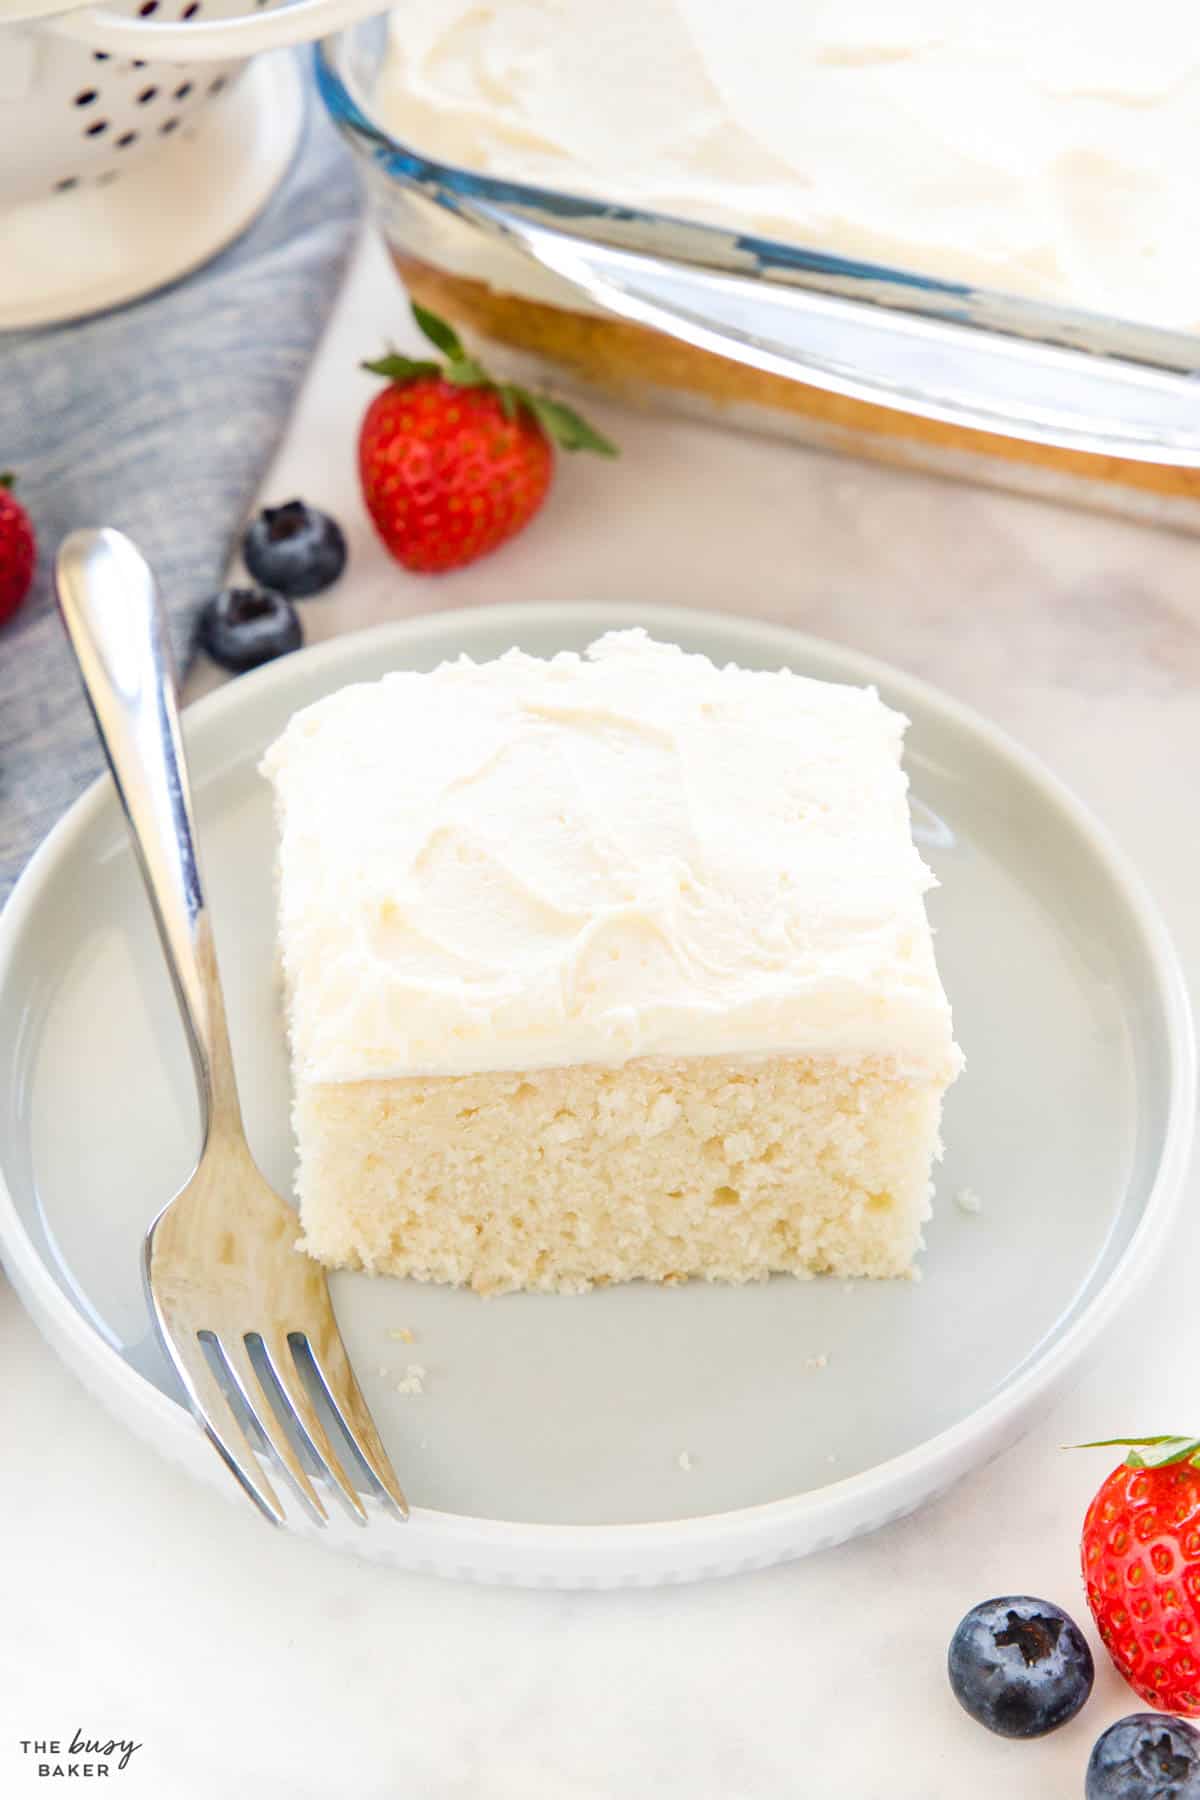  slice of white cake on a plate with a fork